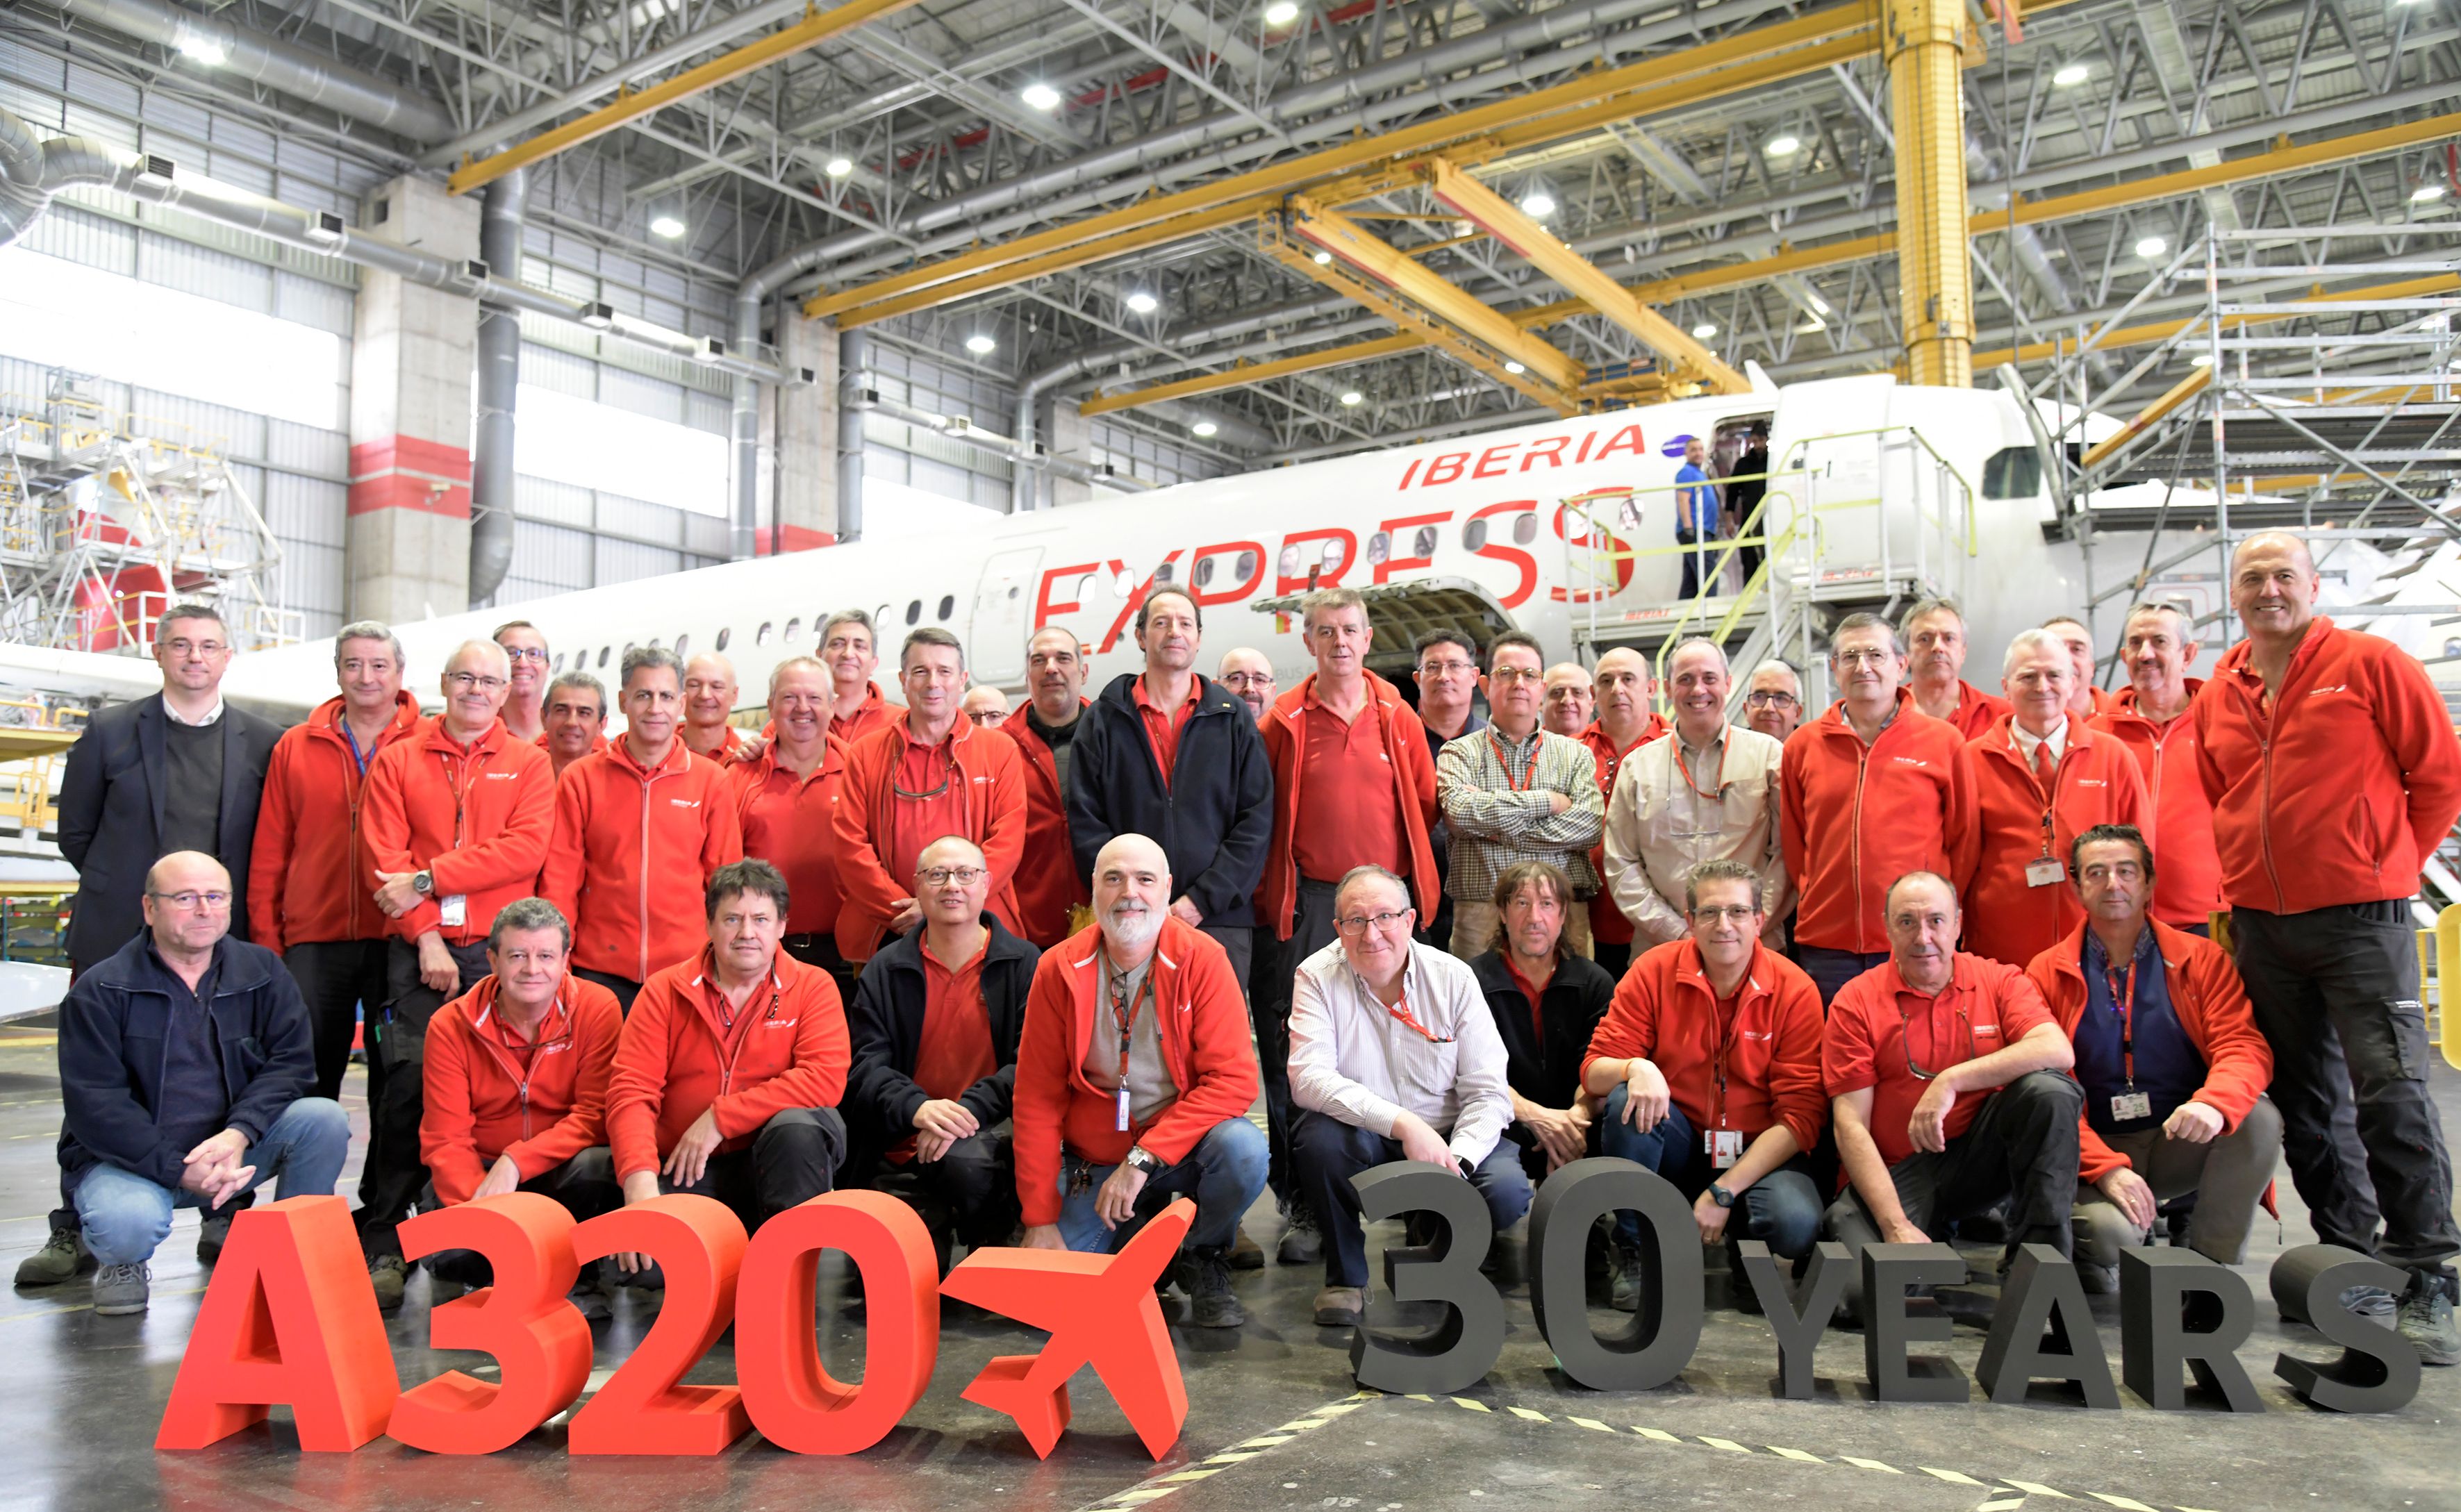 Iberia's MRO celebrates 30 years of completing C1 Checks on Airbus A320 aircraft